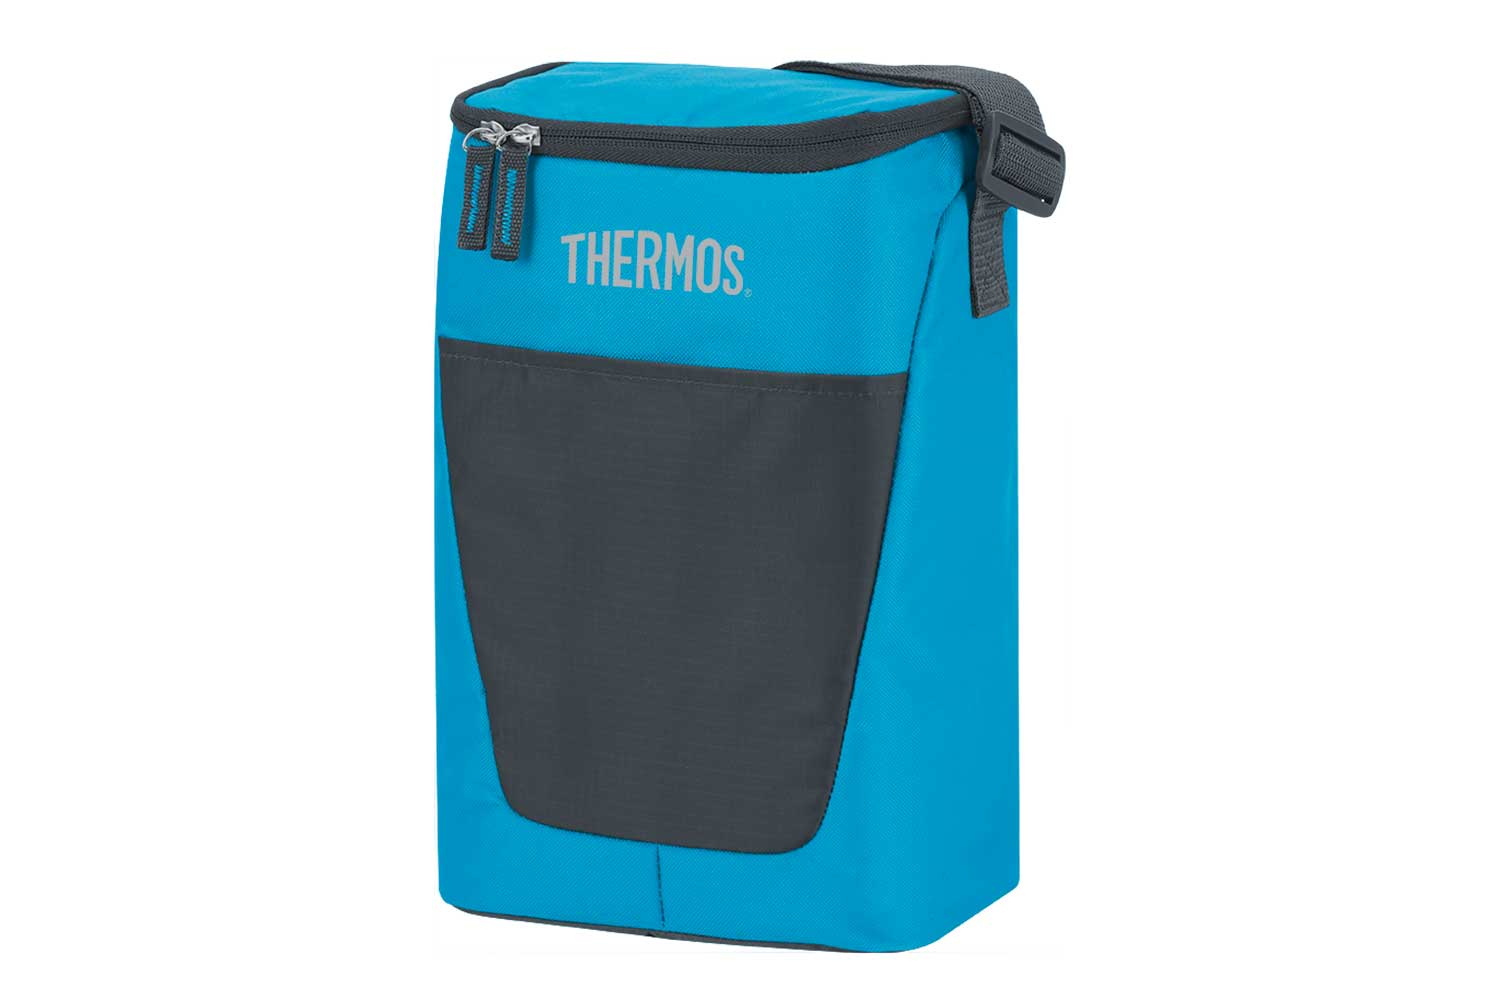 THERMOS 194023 Sac isotherme NEW CLASSIC Bleu 8L-20X14XH32CM - 12 CAN - 6H  FROID